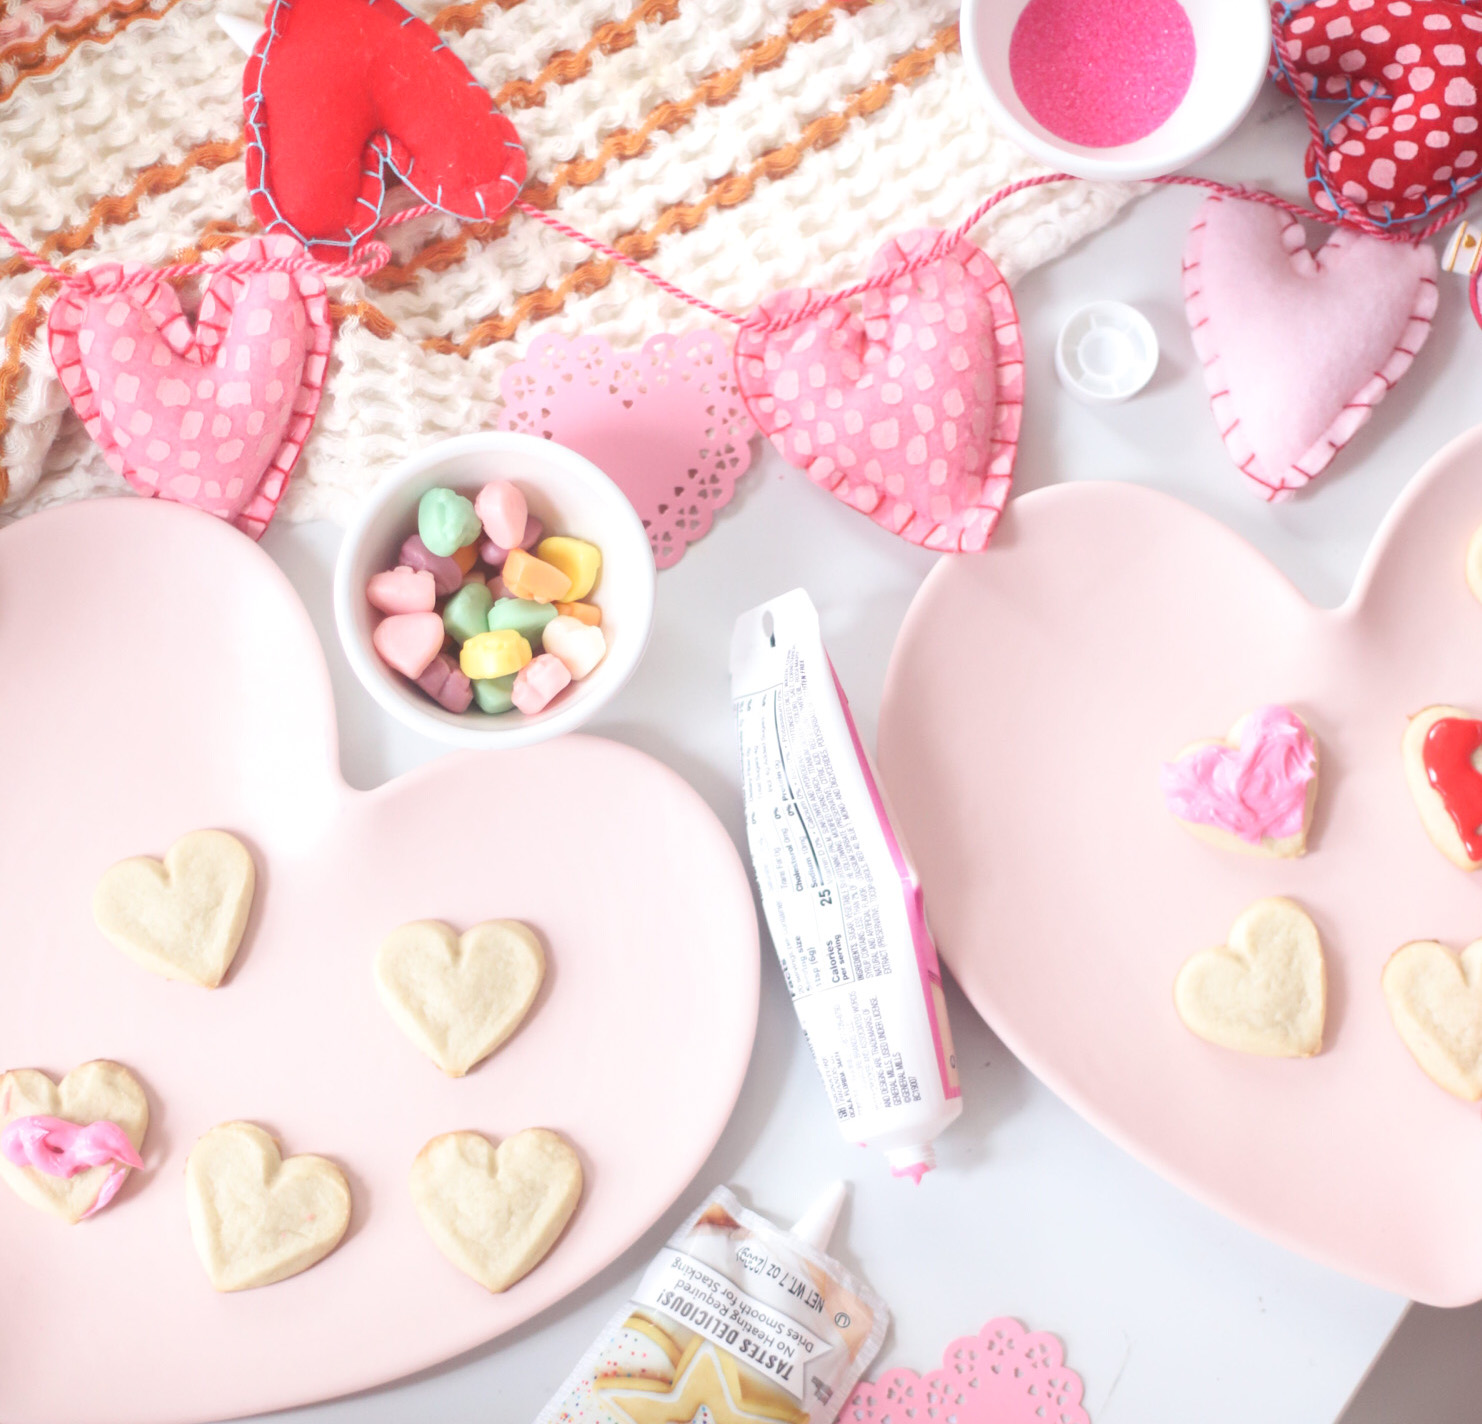 Here’s a simple idea to celebrate the upcoming season of love: an at home kids Valentine’s Day cookie decorating party! Plus, our favorite tips for easy holiday cookie decorating with little kids. | @glitterinclexi | GLITTERINC.COM